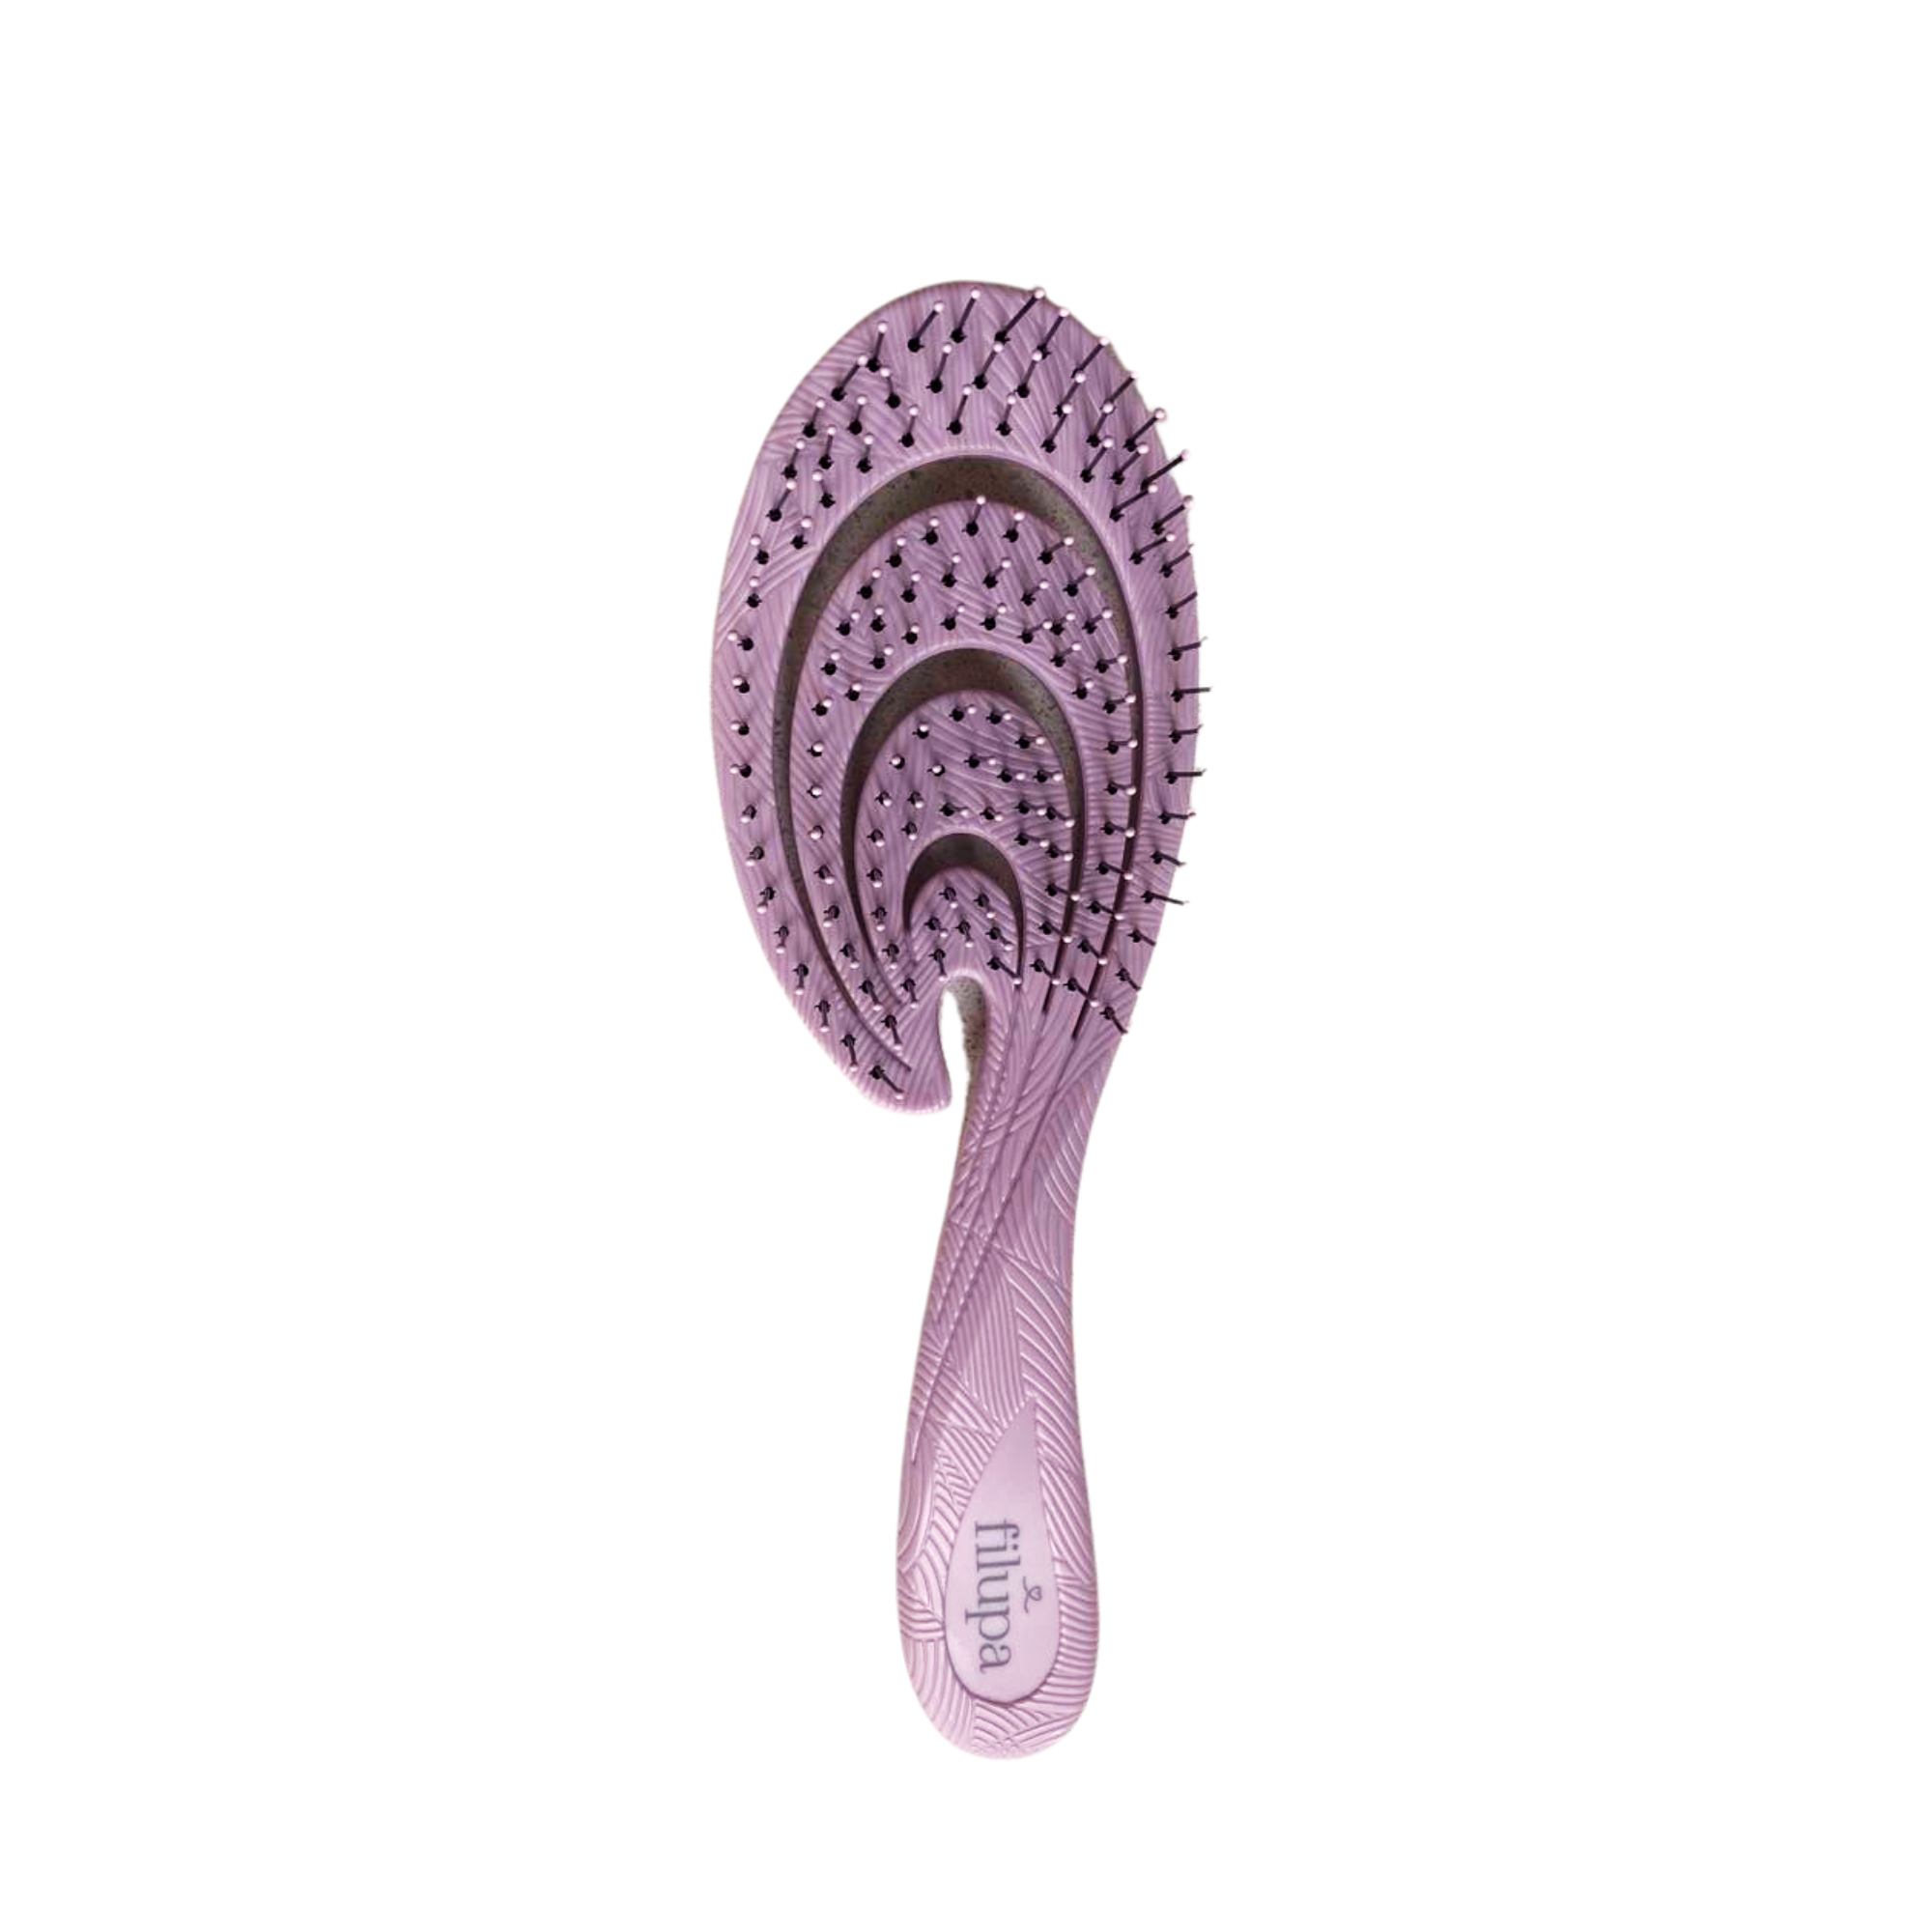 Filupa Pale Mauve Brush from Nordic Bio Brush is 100% recyclable. The brush won't pull on your hair and smoothes the finer hair with ease.